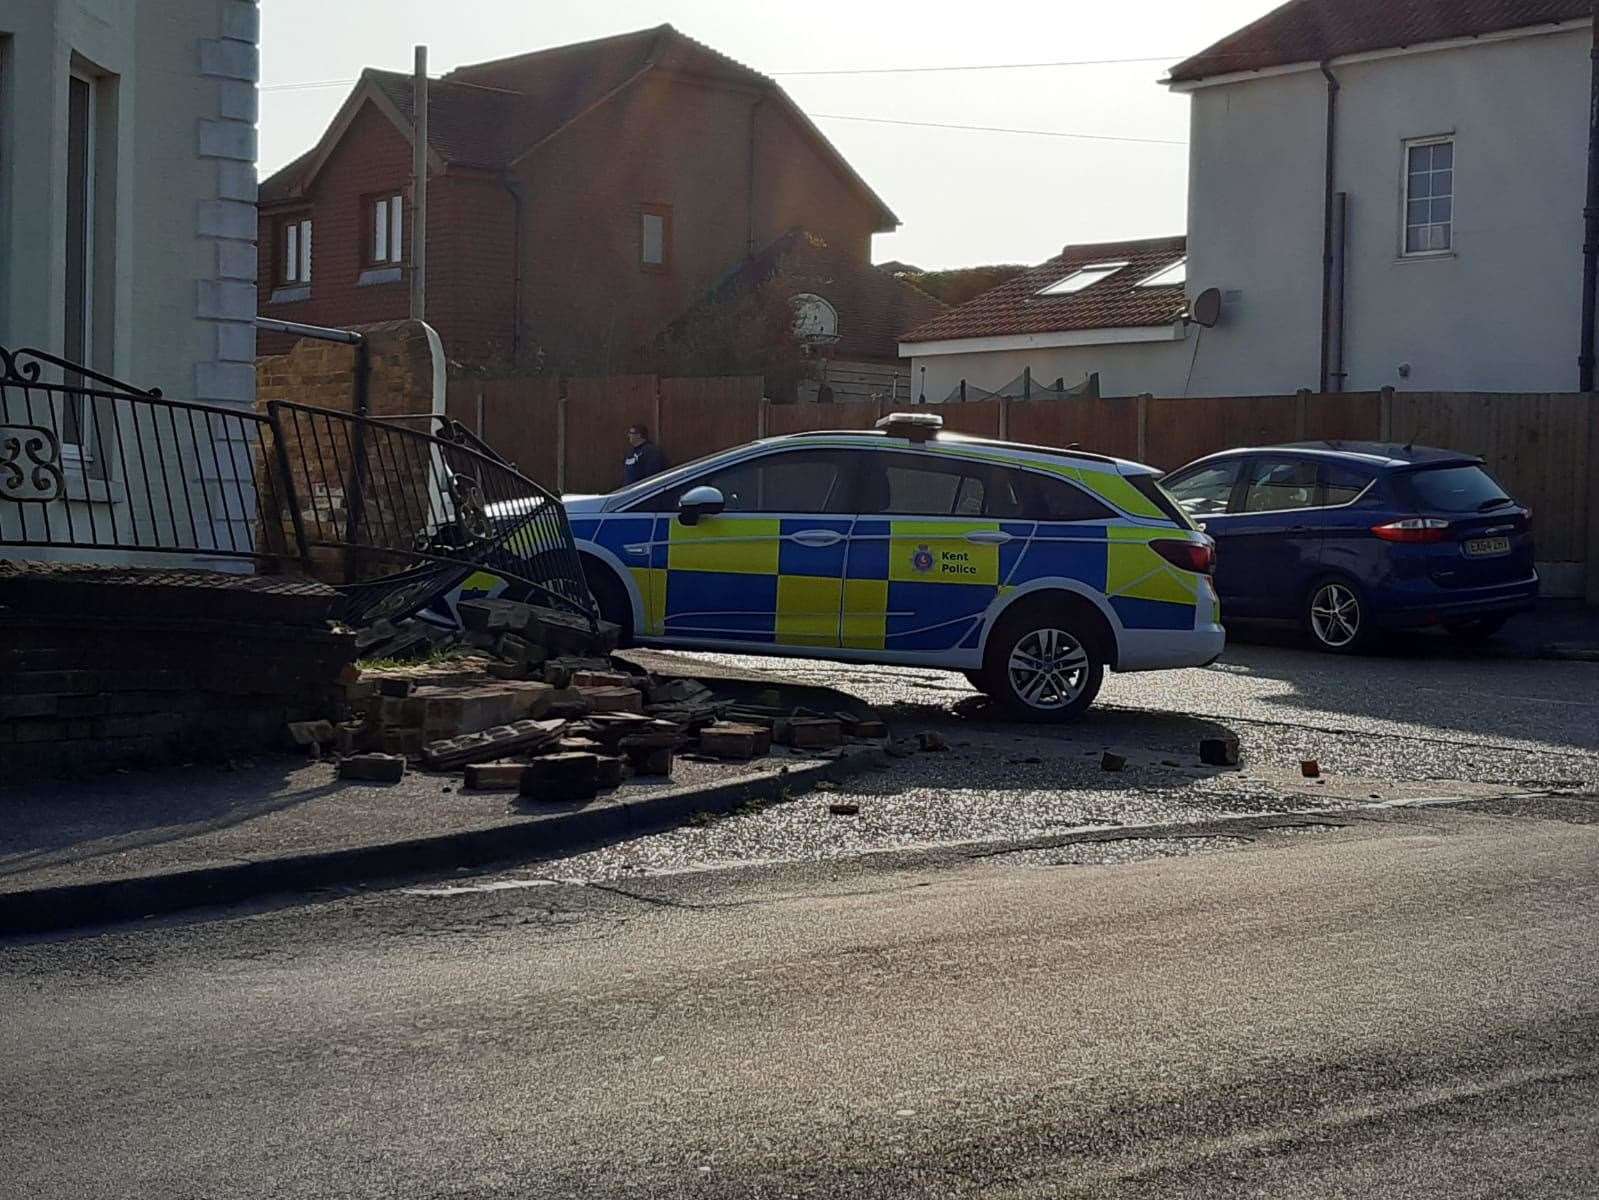 The police car crashed into a wall at about 5.25pm on Sunday